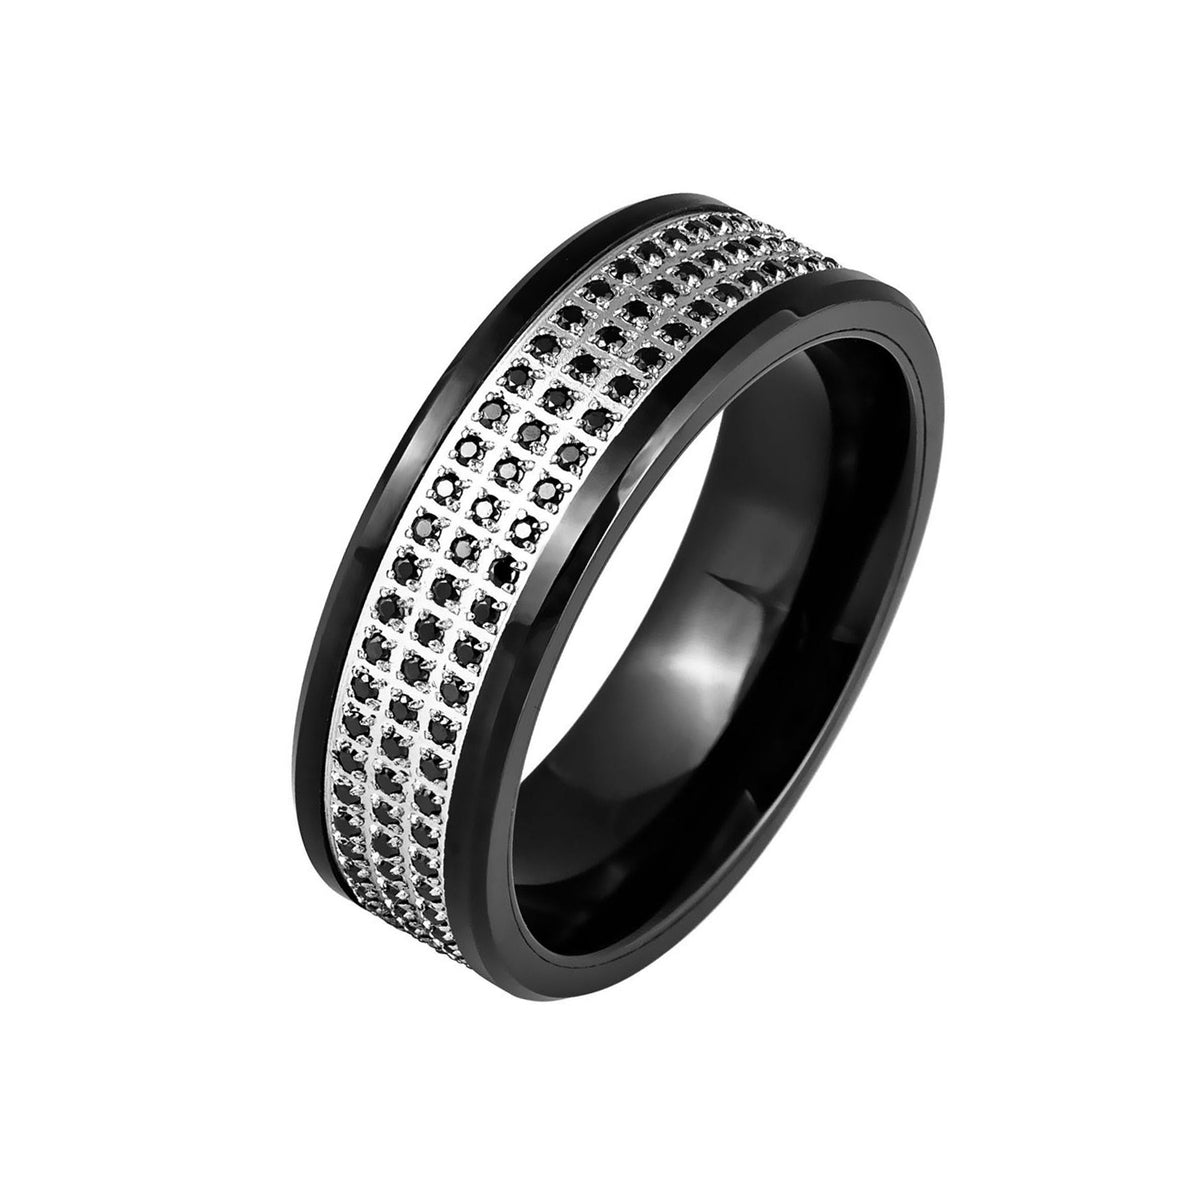 8mm - Tungsten Carbide Ring with 3 Rows of Black Sapphires| RingMen Jewelry